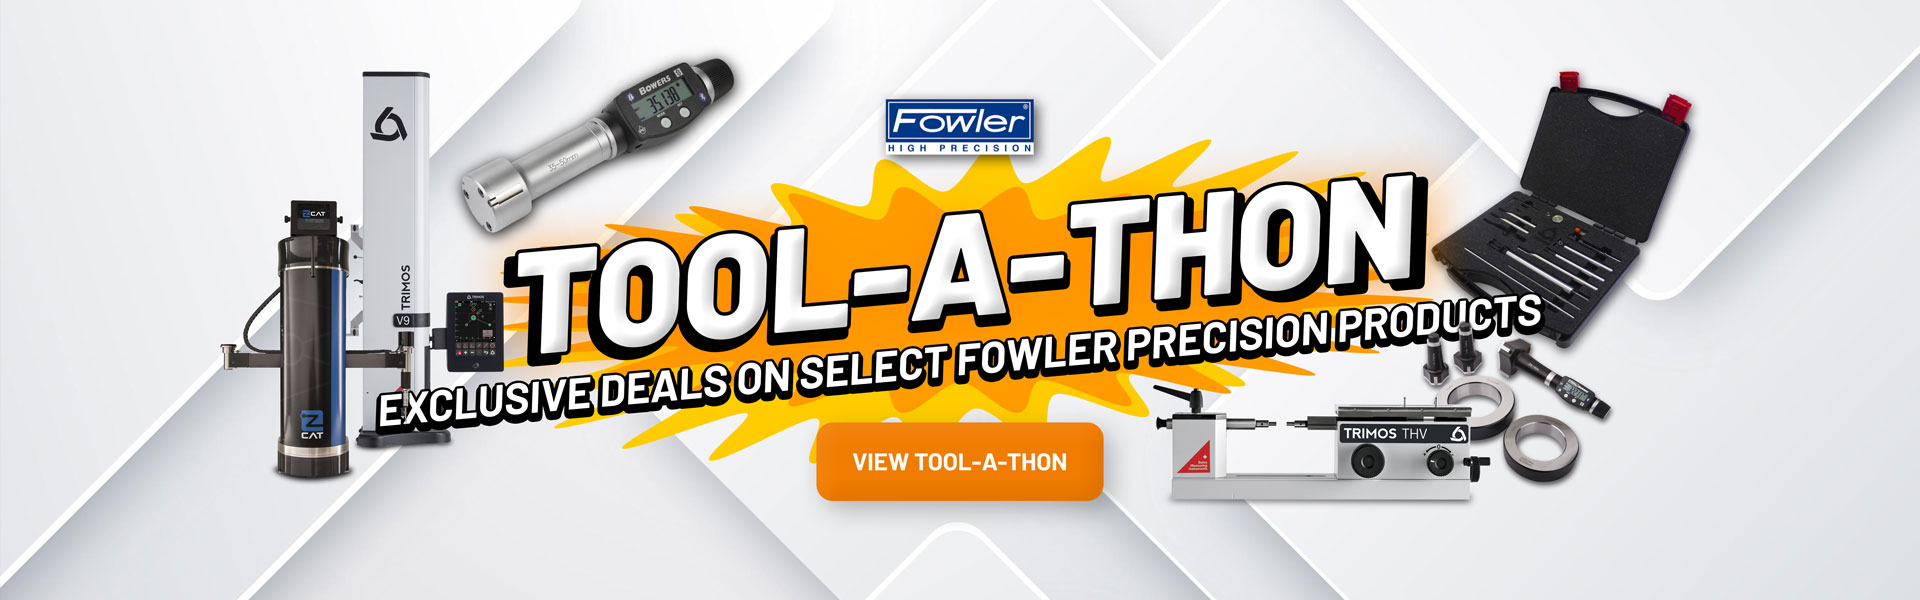 fowler-tool-a-thon-banner